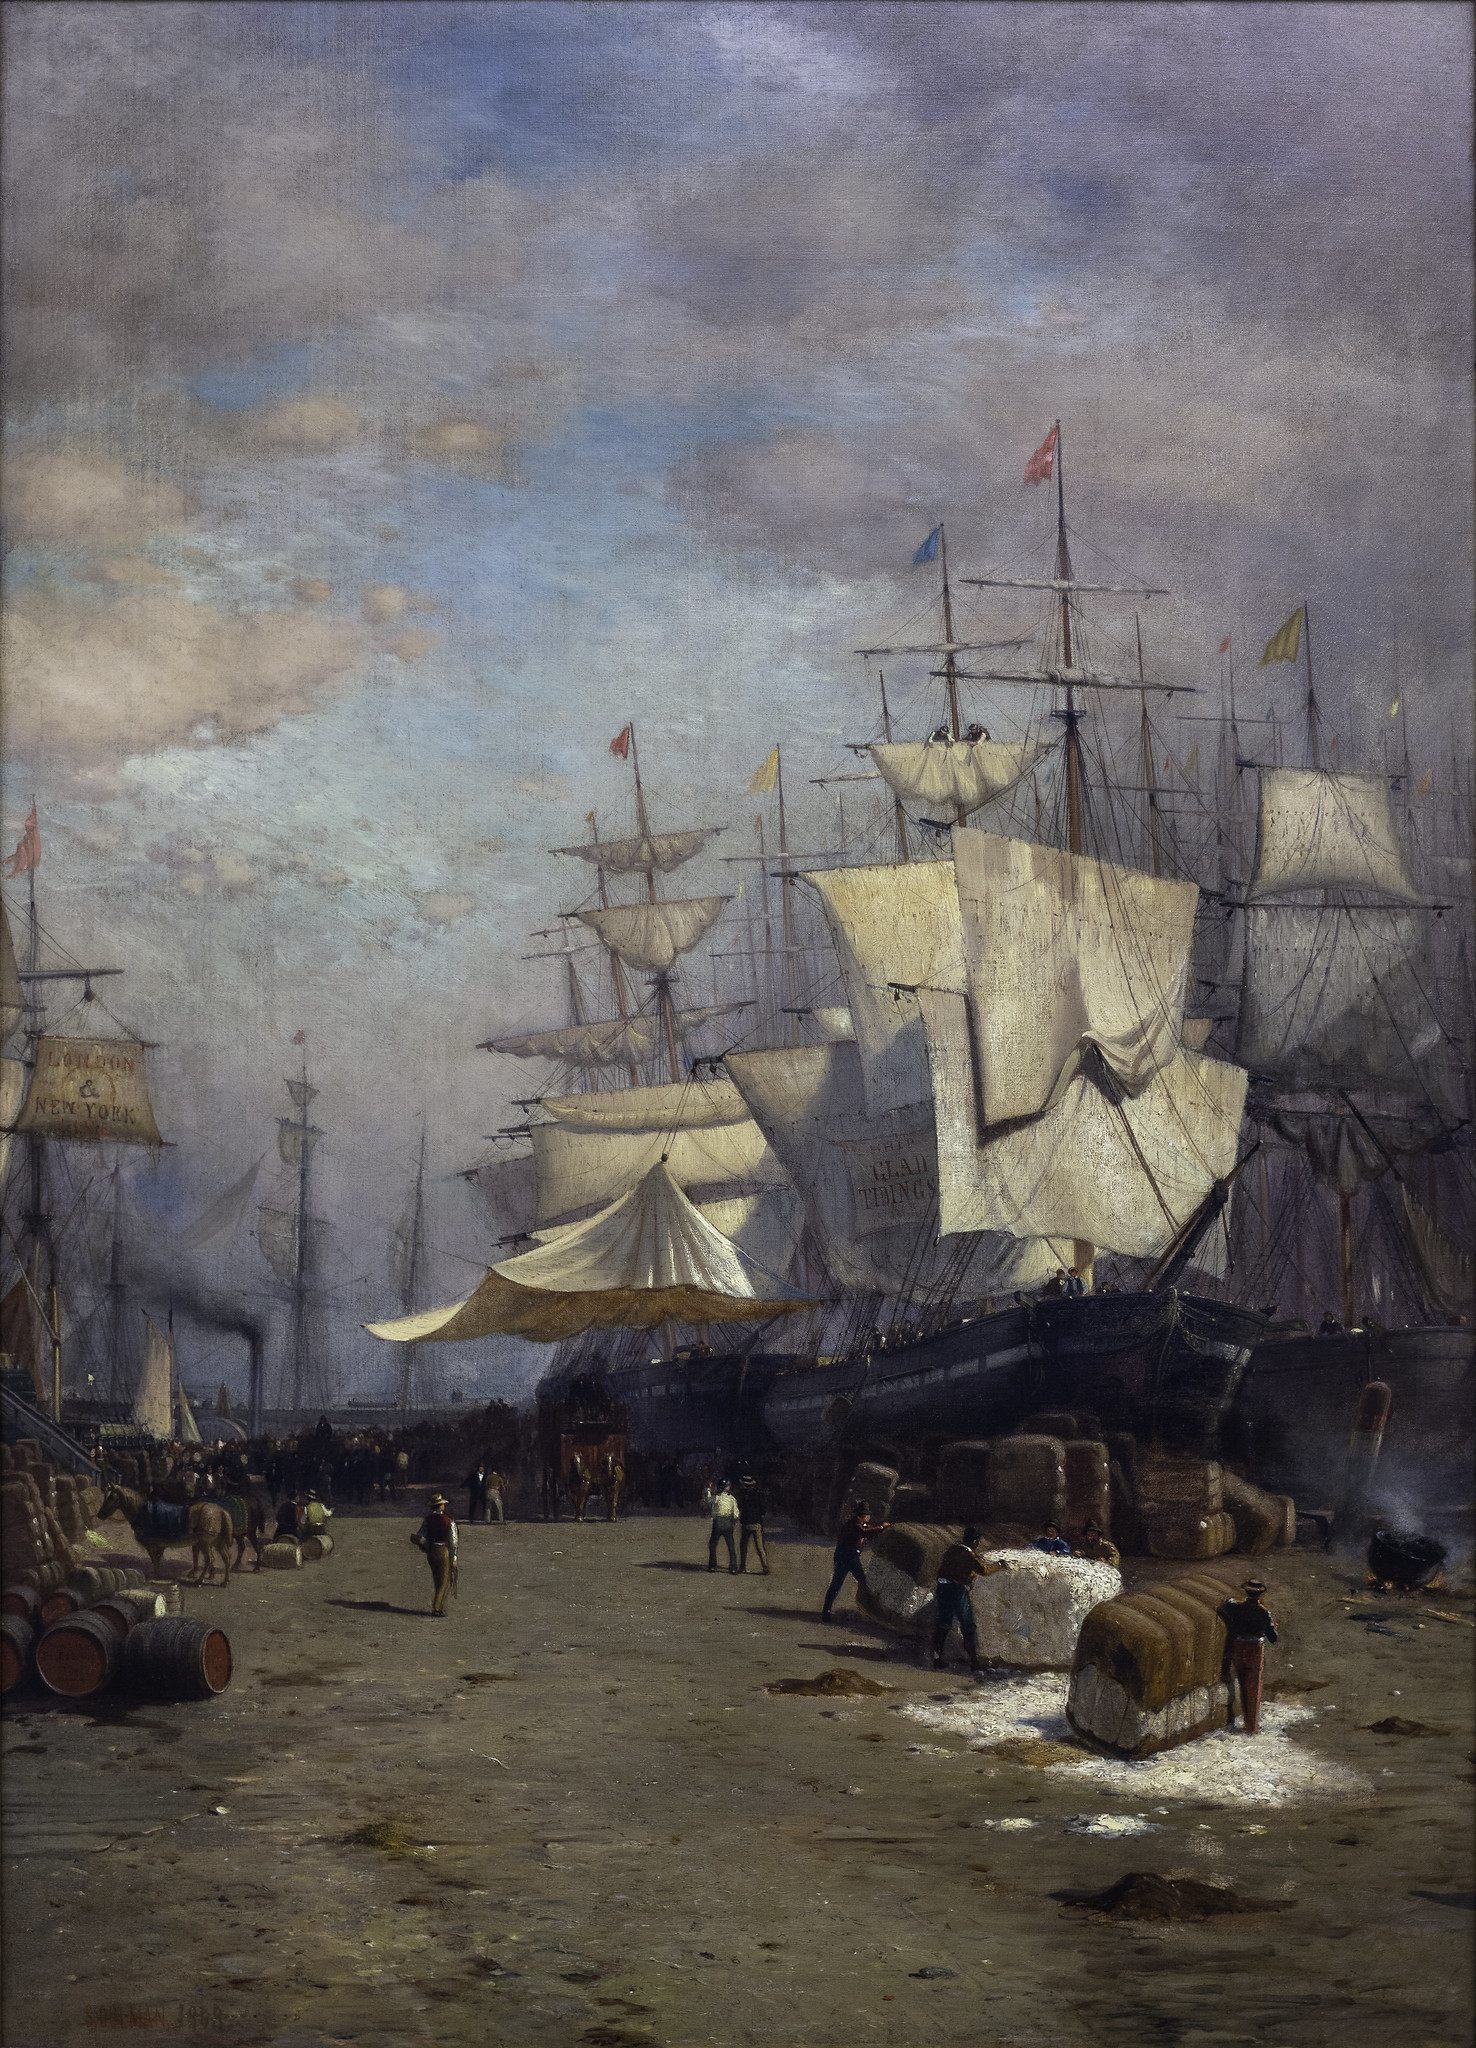 Huge cotton bales can be seen in the right foreground, likely headed for textile mills in the north of England. Samuel Colman, Jr., Ships Unloading, New York, 1868, oil on canvas, 105 x 76 cm (The Terra Foundation for American Art)